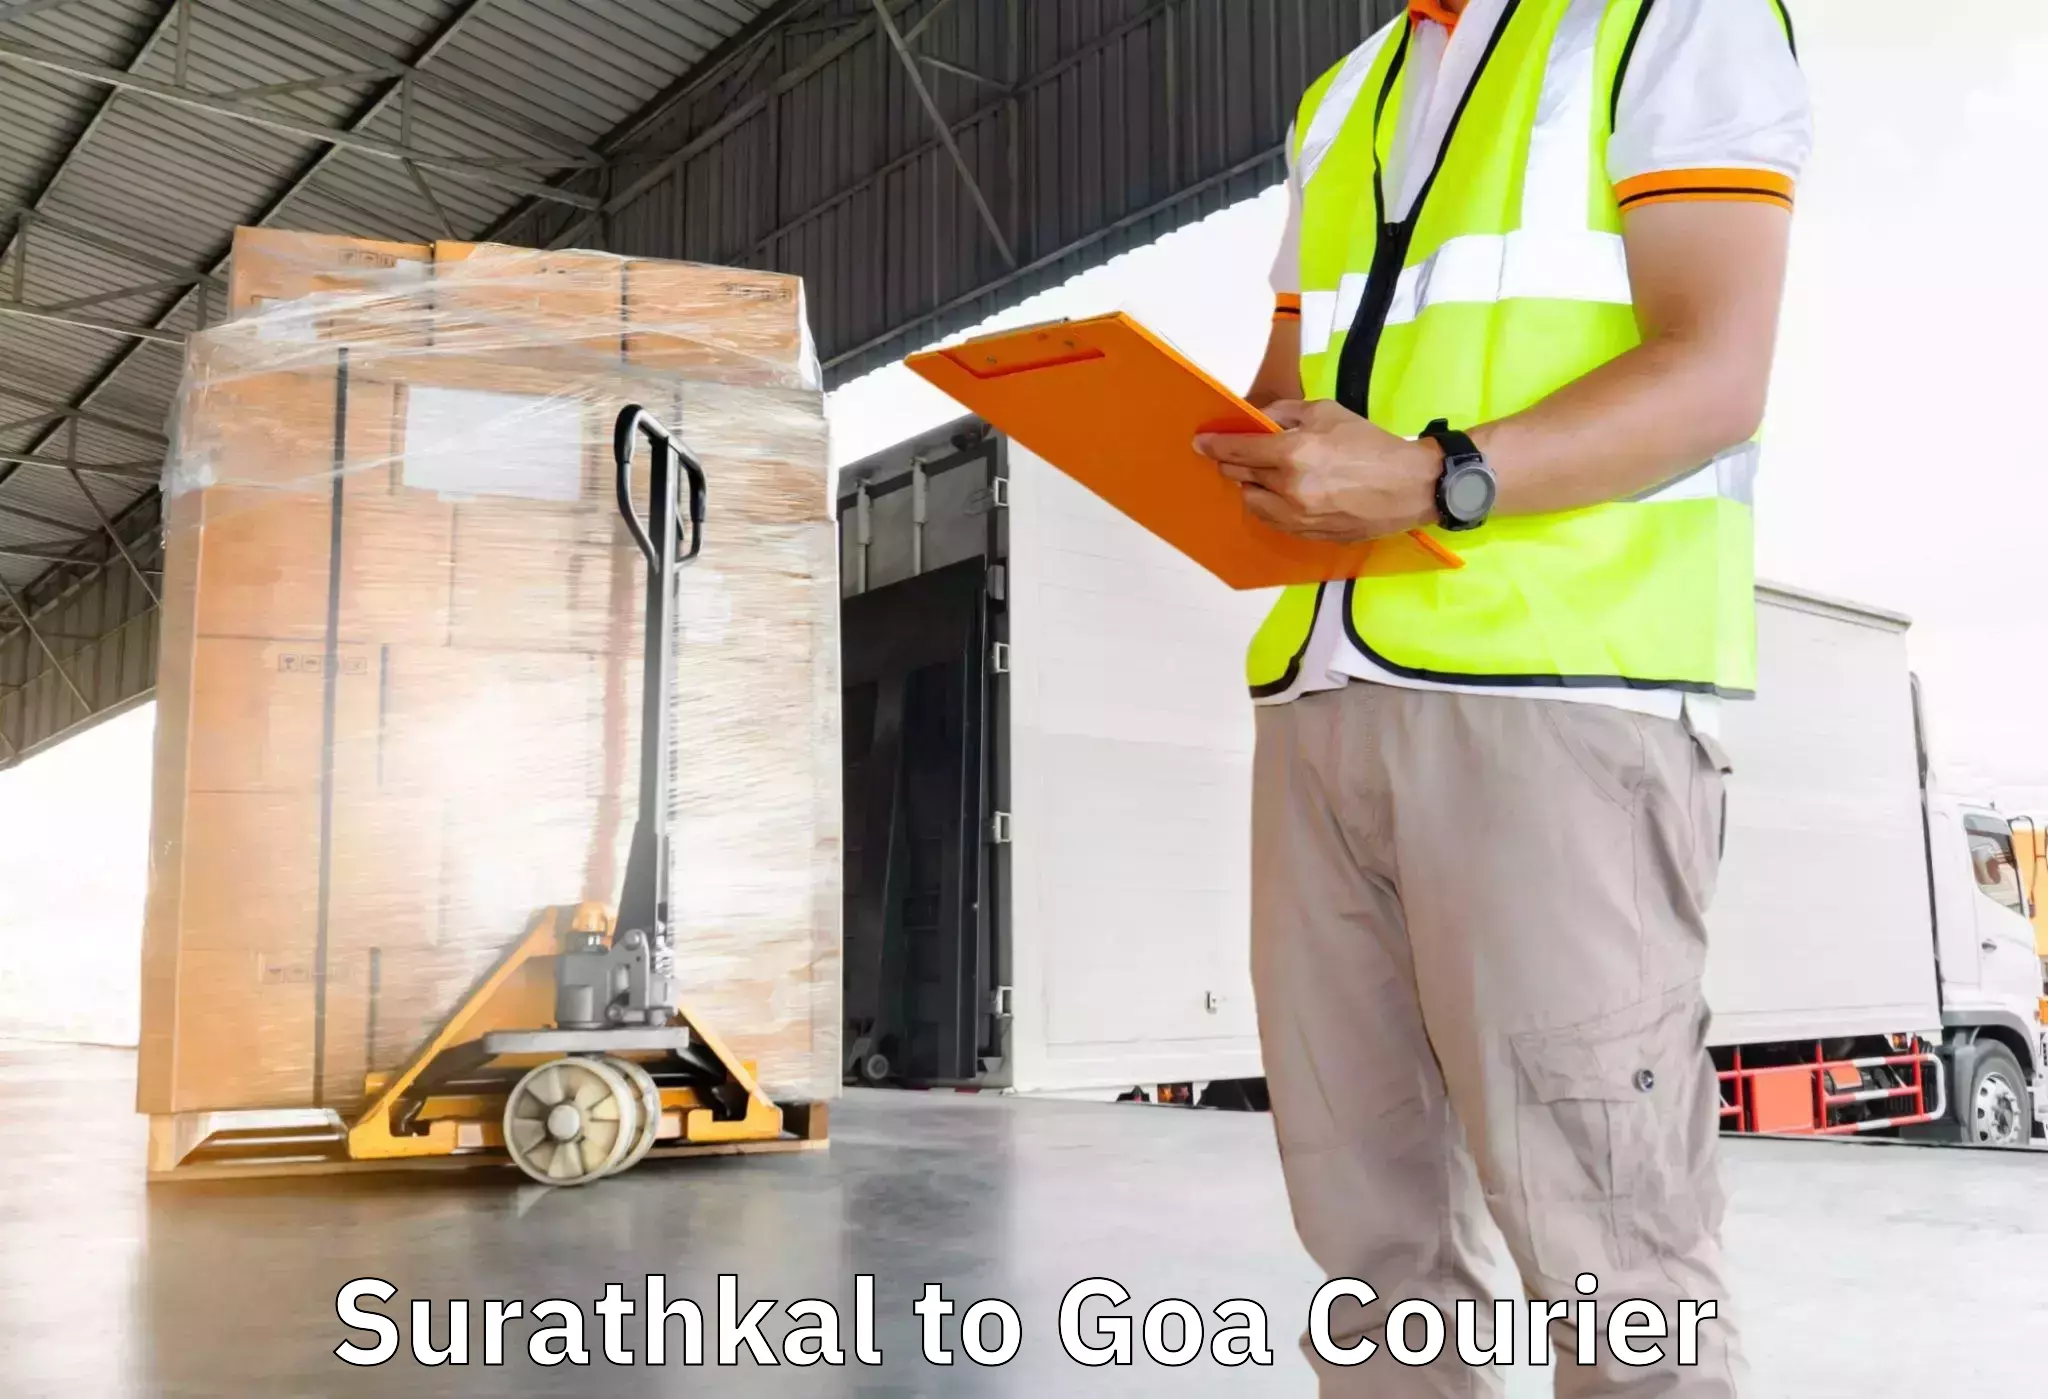 Furniture transport service in Surathkal to IIT Goa